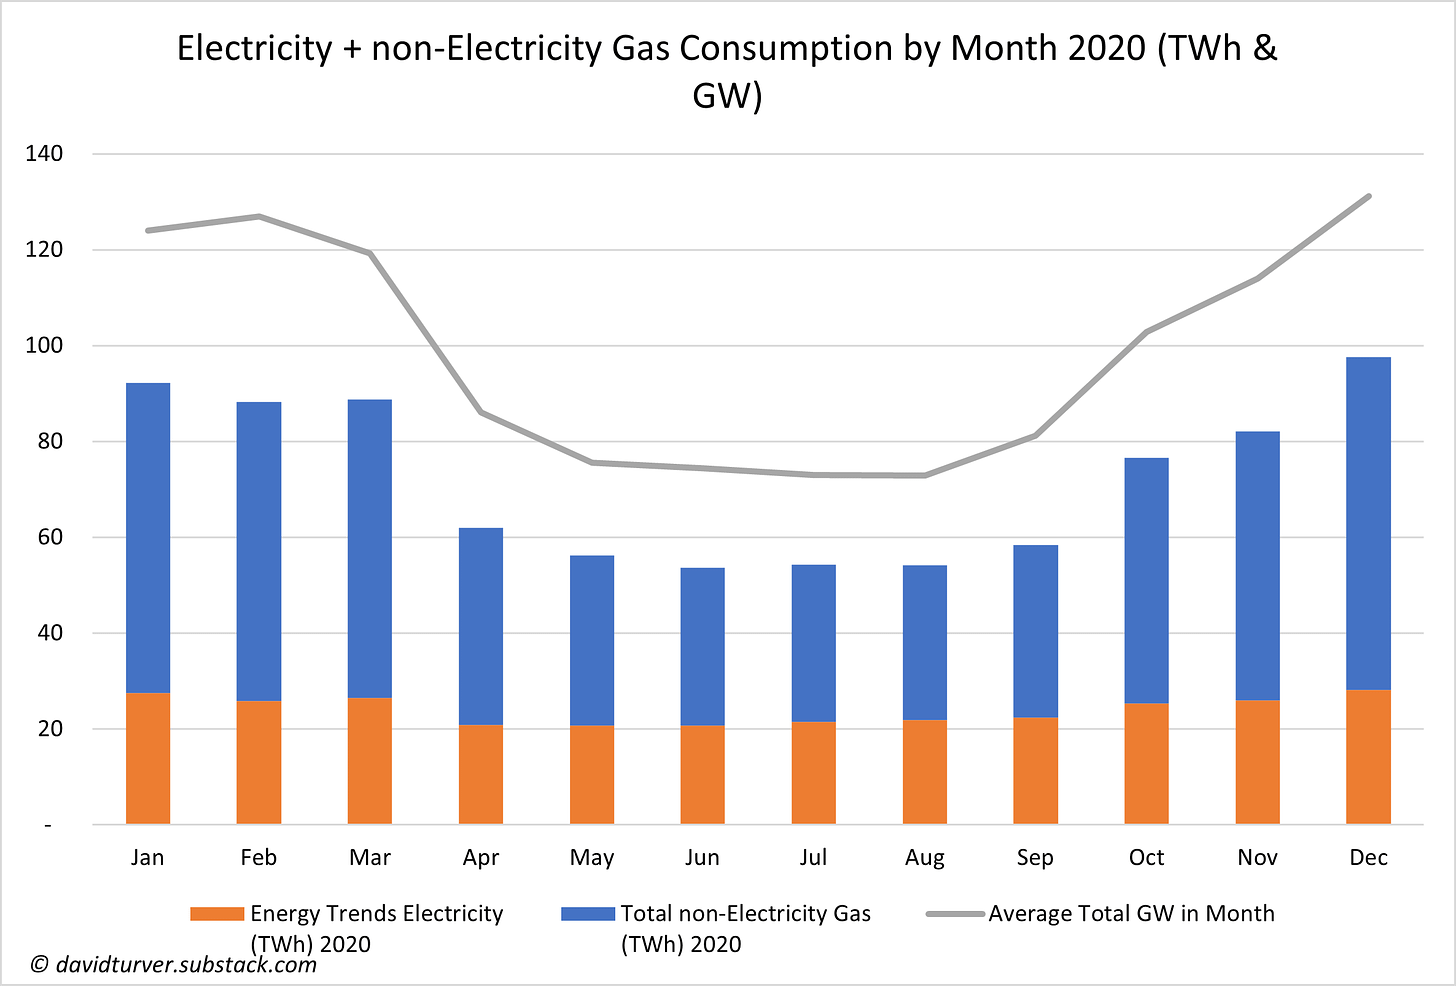 Electricity and non-electricity Gas Consumption by Month 2020 UK